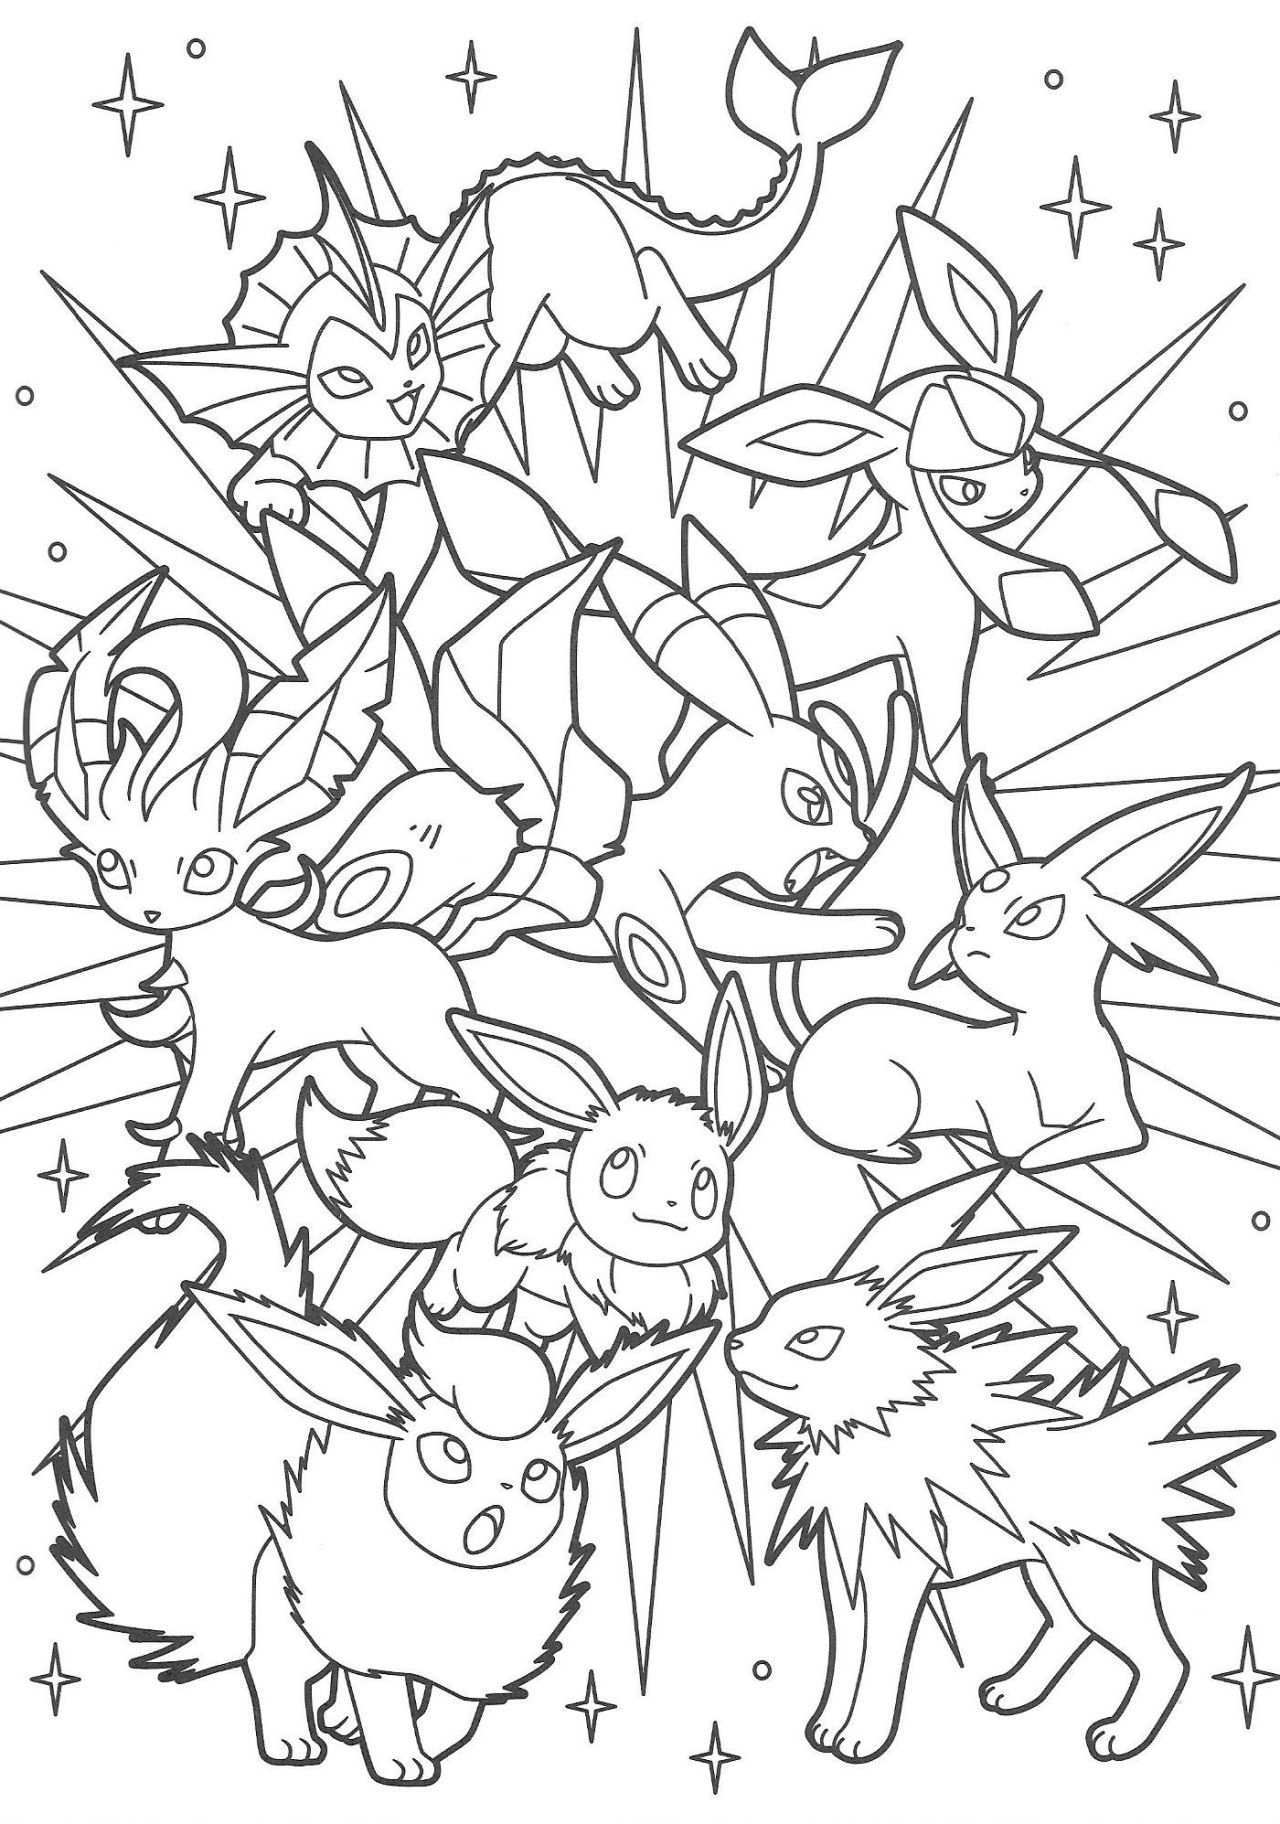 Pokemon Scans From Pacificpikachu S Collection Pikachu And Eevee Friends Coloring Book Pokemon Coloring Sheets Pokemon Coloring Pages Pokemon Coloring